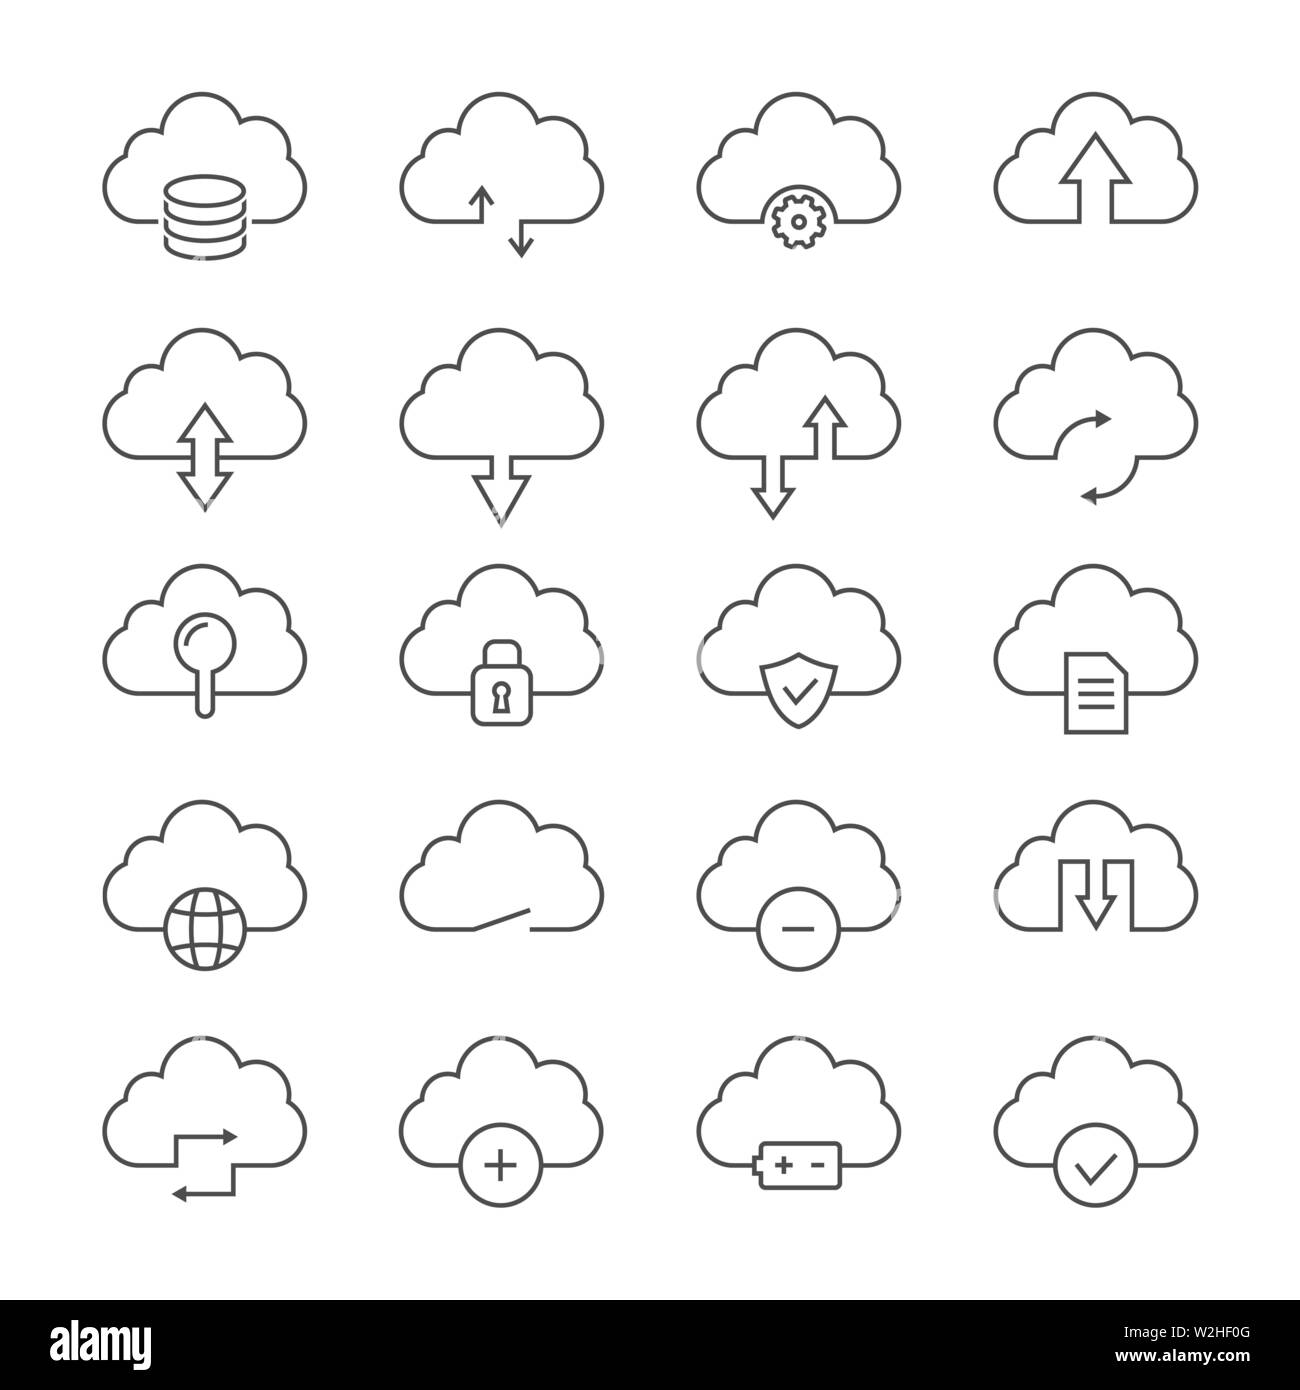 Cloud icon set. Network technology, download and upload symbols Stock Vector